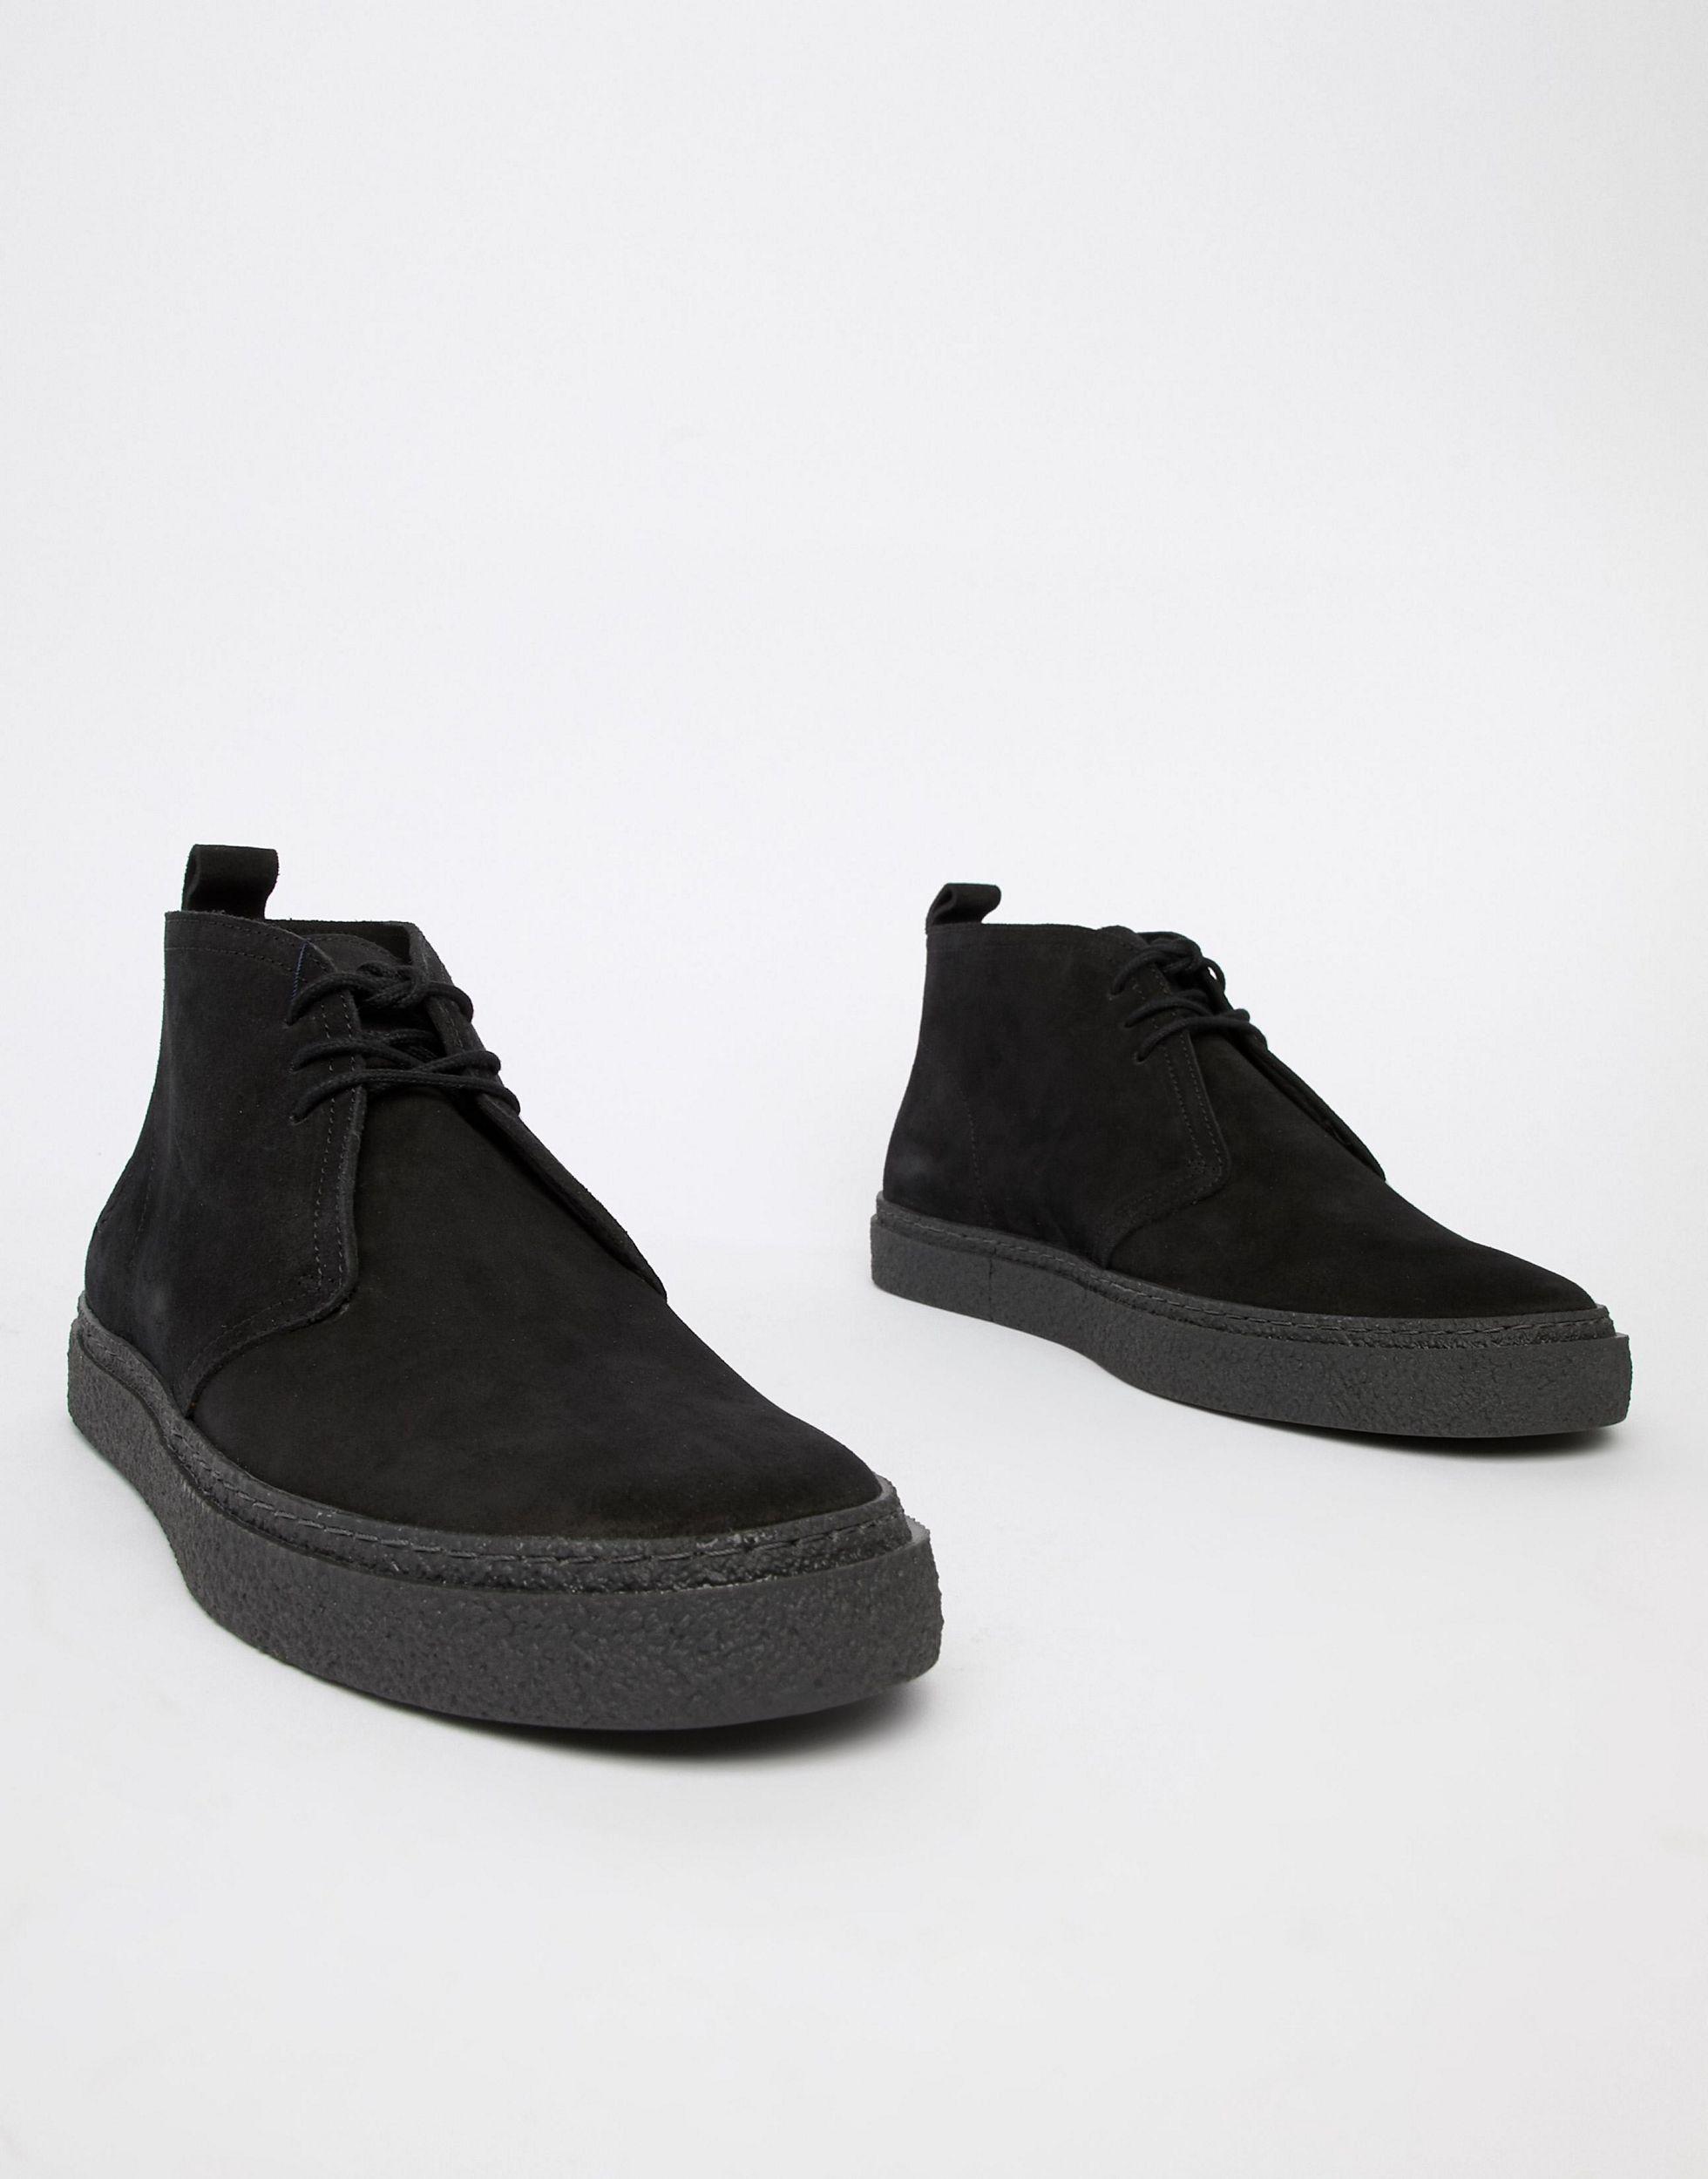 Fred Perry Hawley Mid Suede Boots in Black for Men - Lyst